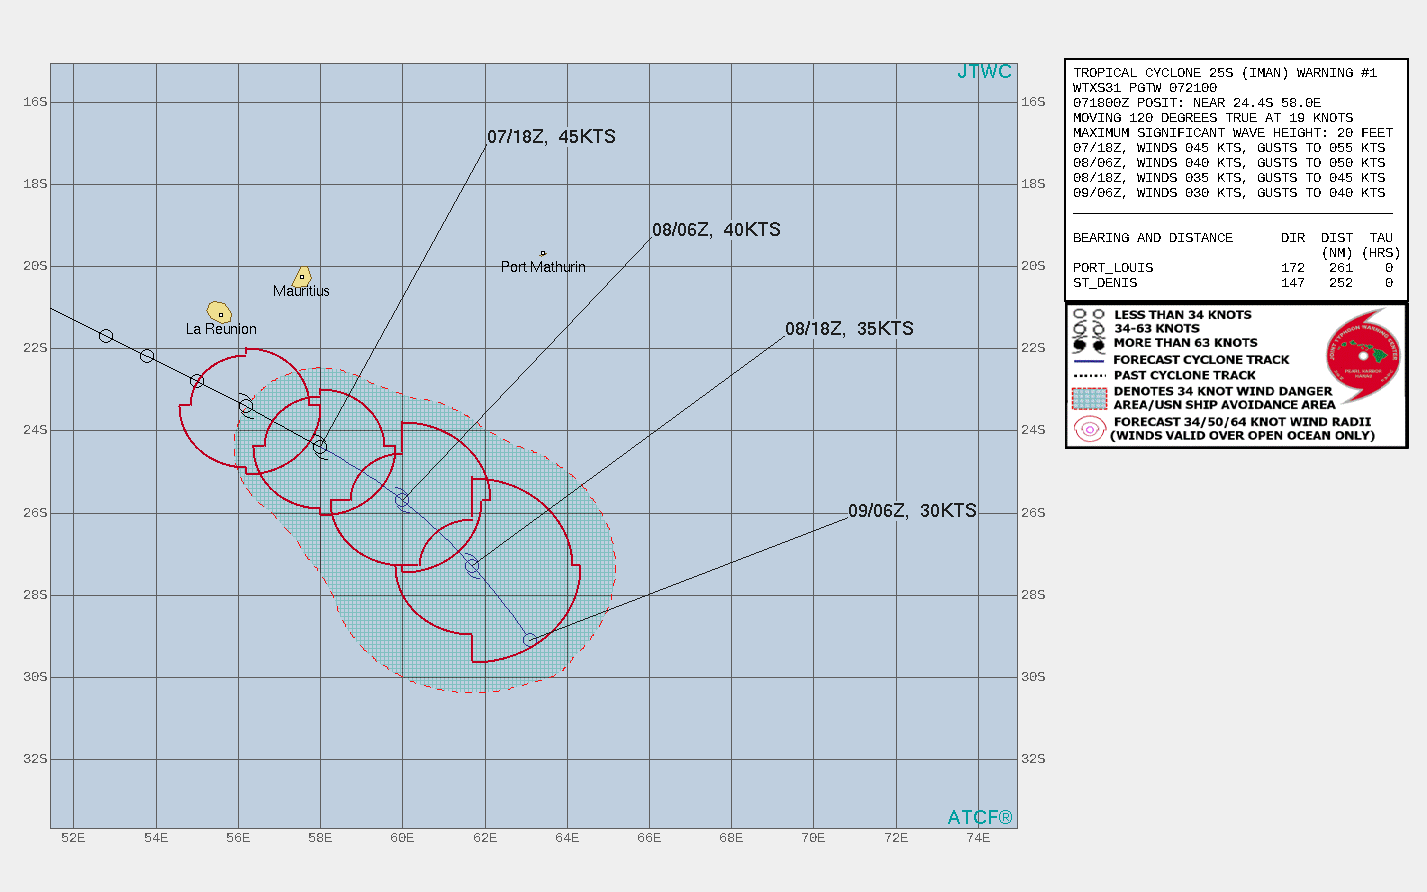 25S(IMAN). WARNING 1 ISSUED AT 07/21UTC.25S(IMAN) HAS CONSOLIDATED AND INTENSIFIED OVER THE PAST SIX HOURS WHILE  TRACKING EAST-SOUTHEASTWARD IN THE GRADIENT BETWEEN SUBTROPICAL  RIDGING TO THE NORTHEAST AND AN APPROACHING, DEEP-LAYER TROUGH TO  THE SOUTHWEST. THE SYSTEM IS EXPECTED TO CONTINUE TRACKING GENERALLY  SOUTHEASTWARD OVER THE NEXT 36 HOURS AND COMPLETE EXTRATROPICAL  TRANSITION AS THE APPROACHING TROUGH OVERTAKES THE SYSTEM. WHILE  POLEWARD OUTFLOW IS STRONG AND SEA SURFACE TEMPERATURE IS MARGINALLY  FAVORABLE AT AROUND 27C, VERTICAL WIND SHEAR IS VERY HIGH (GREATER  THAN 30 KNOTS). THE CONTINUED IMPACT OF STRONG VERTICAL WIND SHEAR  AND PASSAGE OVER COOL WATER ARE EXPECTED TO WEAKEN THE SYSTEM  THROUGHOUT THE FORECAST PERIOD, WITH NO OFFSETTING BAROCLINIC  SUPPORT FROM INTERACTION WITH THE AFOREMENTIONED TROUGH.